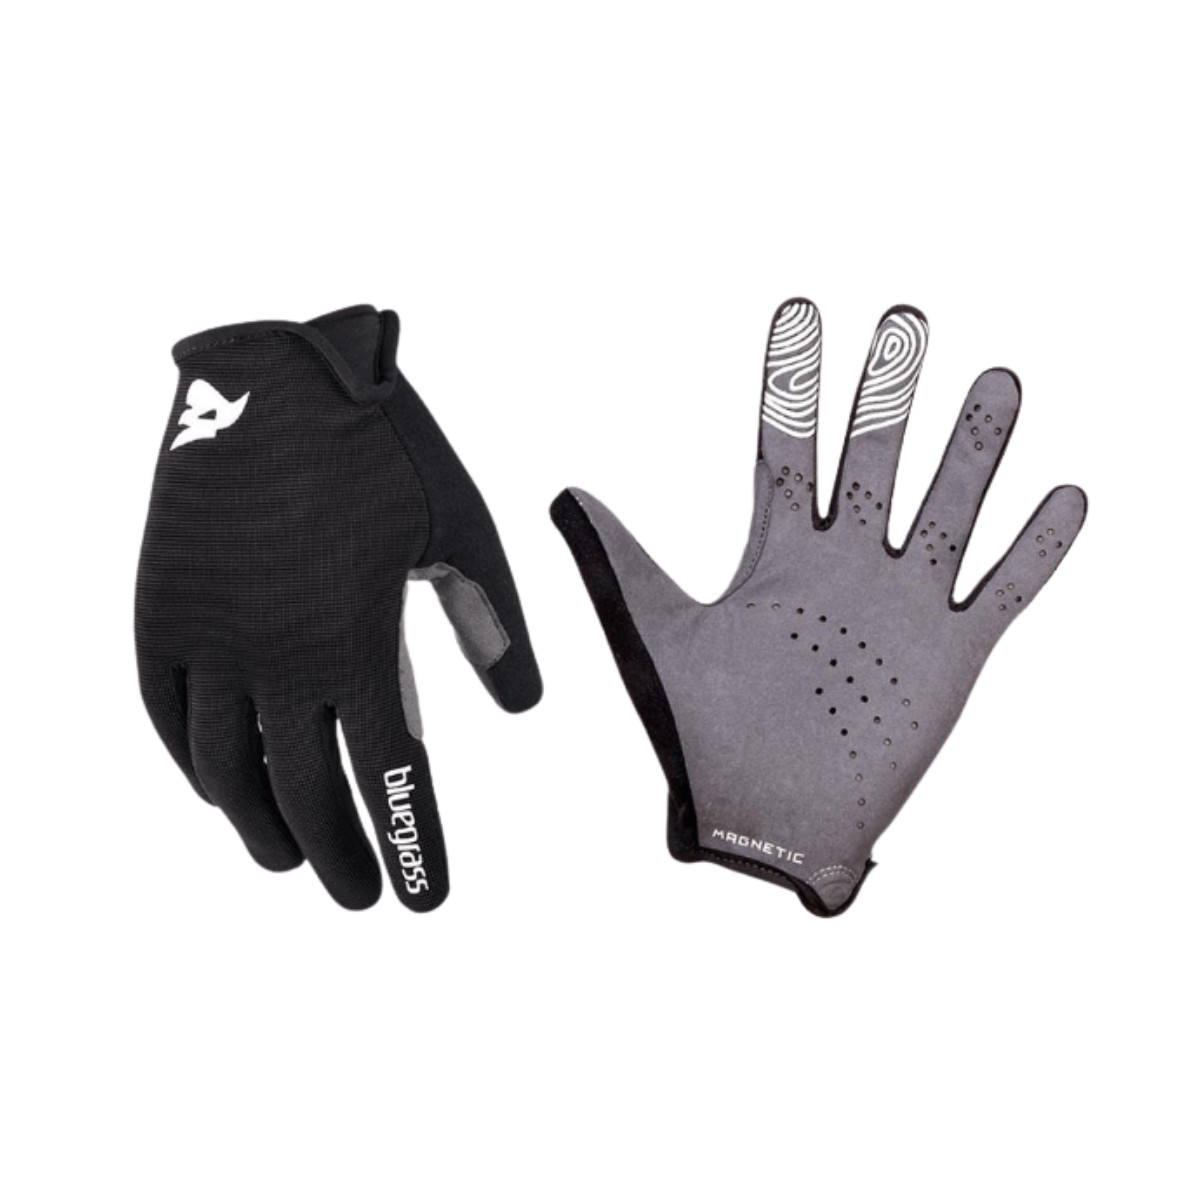 Cycling gloves Bluegrass Magnete Lite Black, Size S